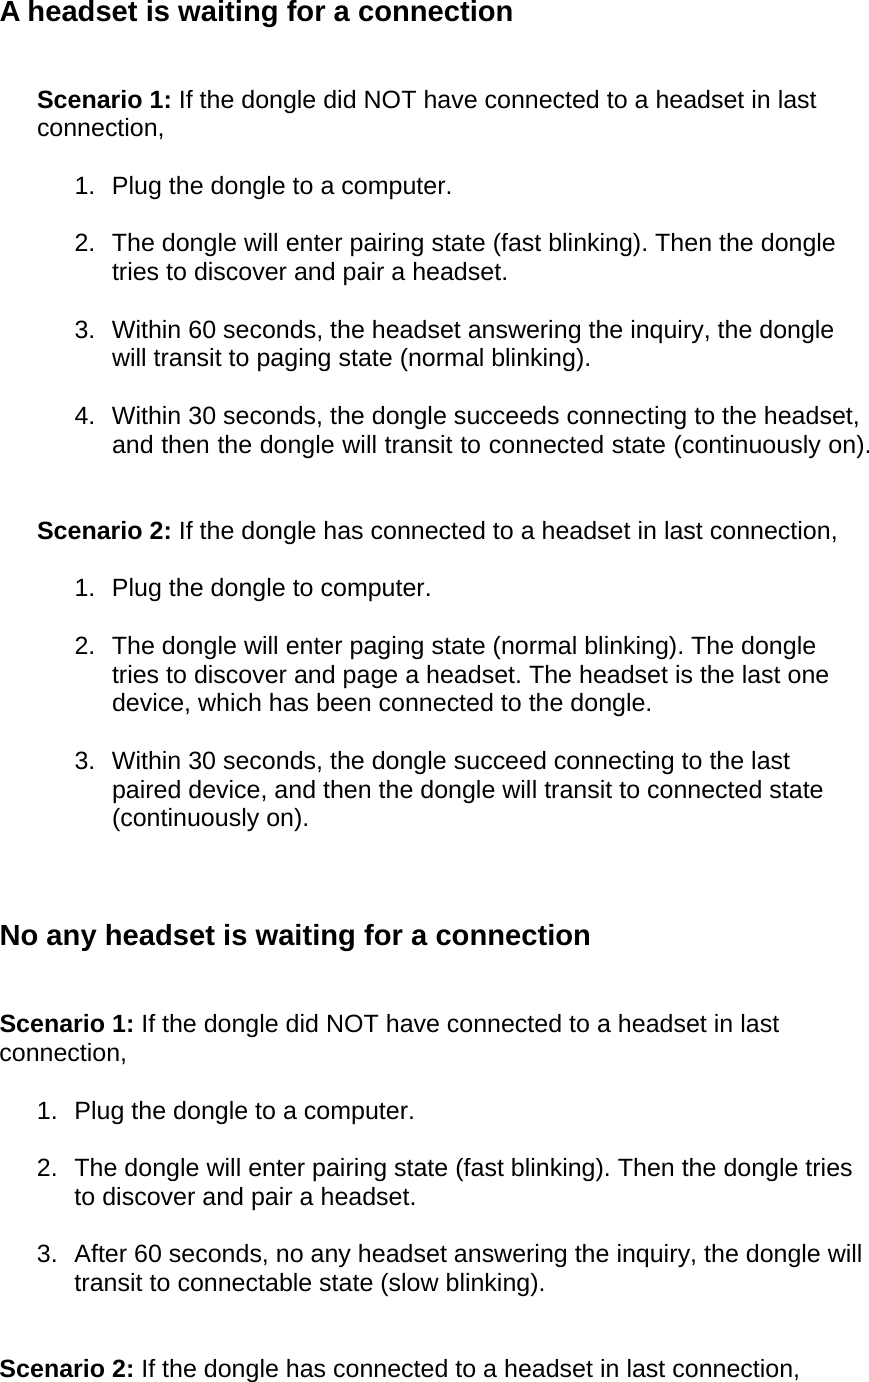 A headset is waiting for a connection   Scenario 1: If the dongle did NOT have connected to a headset in last connection,  1.  Plug the dongle to a computer.  2.  The dongle will enter pairing state (fast blinking). Then the dongle tries to discover and pair a headset.  3.  Within 60 seconds, the headset answering the inquiry, the dongle will transit to paging state (normal blinking).  4.  Within 30 seconds, the dongle succeeds connecting to the headset, and then the dongle will transit to connected state (continuously on).   Scenario 2: If the dongle has connected to a headset in last connection,  1.  Plug the dongle to computer.  2.  The dongle will enter paging state (normal blinking). The dongle tries to discover and page a headset. The headset is the last one device, which has been connected to the dongle.  3.  Within 30 seconds, the dongle succeed connecting to the last paired device, and then the dongle will transit to connected state (continuously on).    No any headset is waiting for a connection   Scenario 1: If the dongle did NOT have connected to a headset in last connection,  1.  Plug the dongle to a computer.  2.  The dongle will enter pairing state (fast blinking). Then the dongle tries to discover and pair a headset.  3.  After 60 seconds, no any headset answering the inquiry, the dongle will transit to connectable state (slow blinking).   Scenario 2: If the dongle has connected to a headset in last connection,  